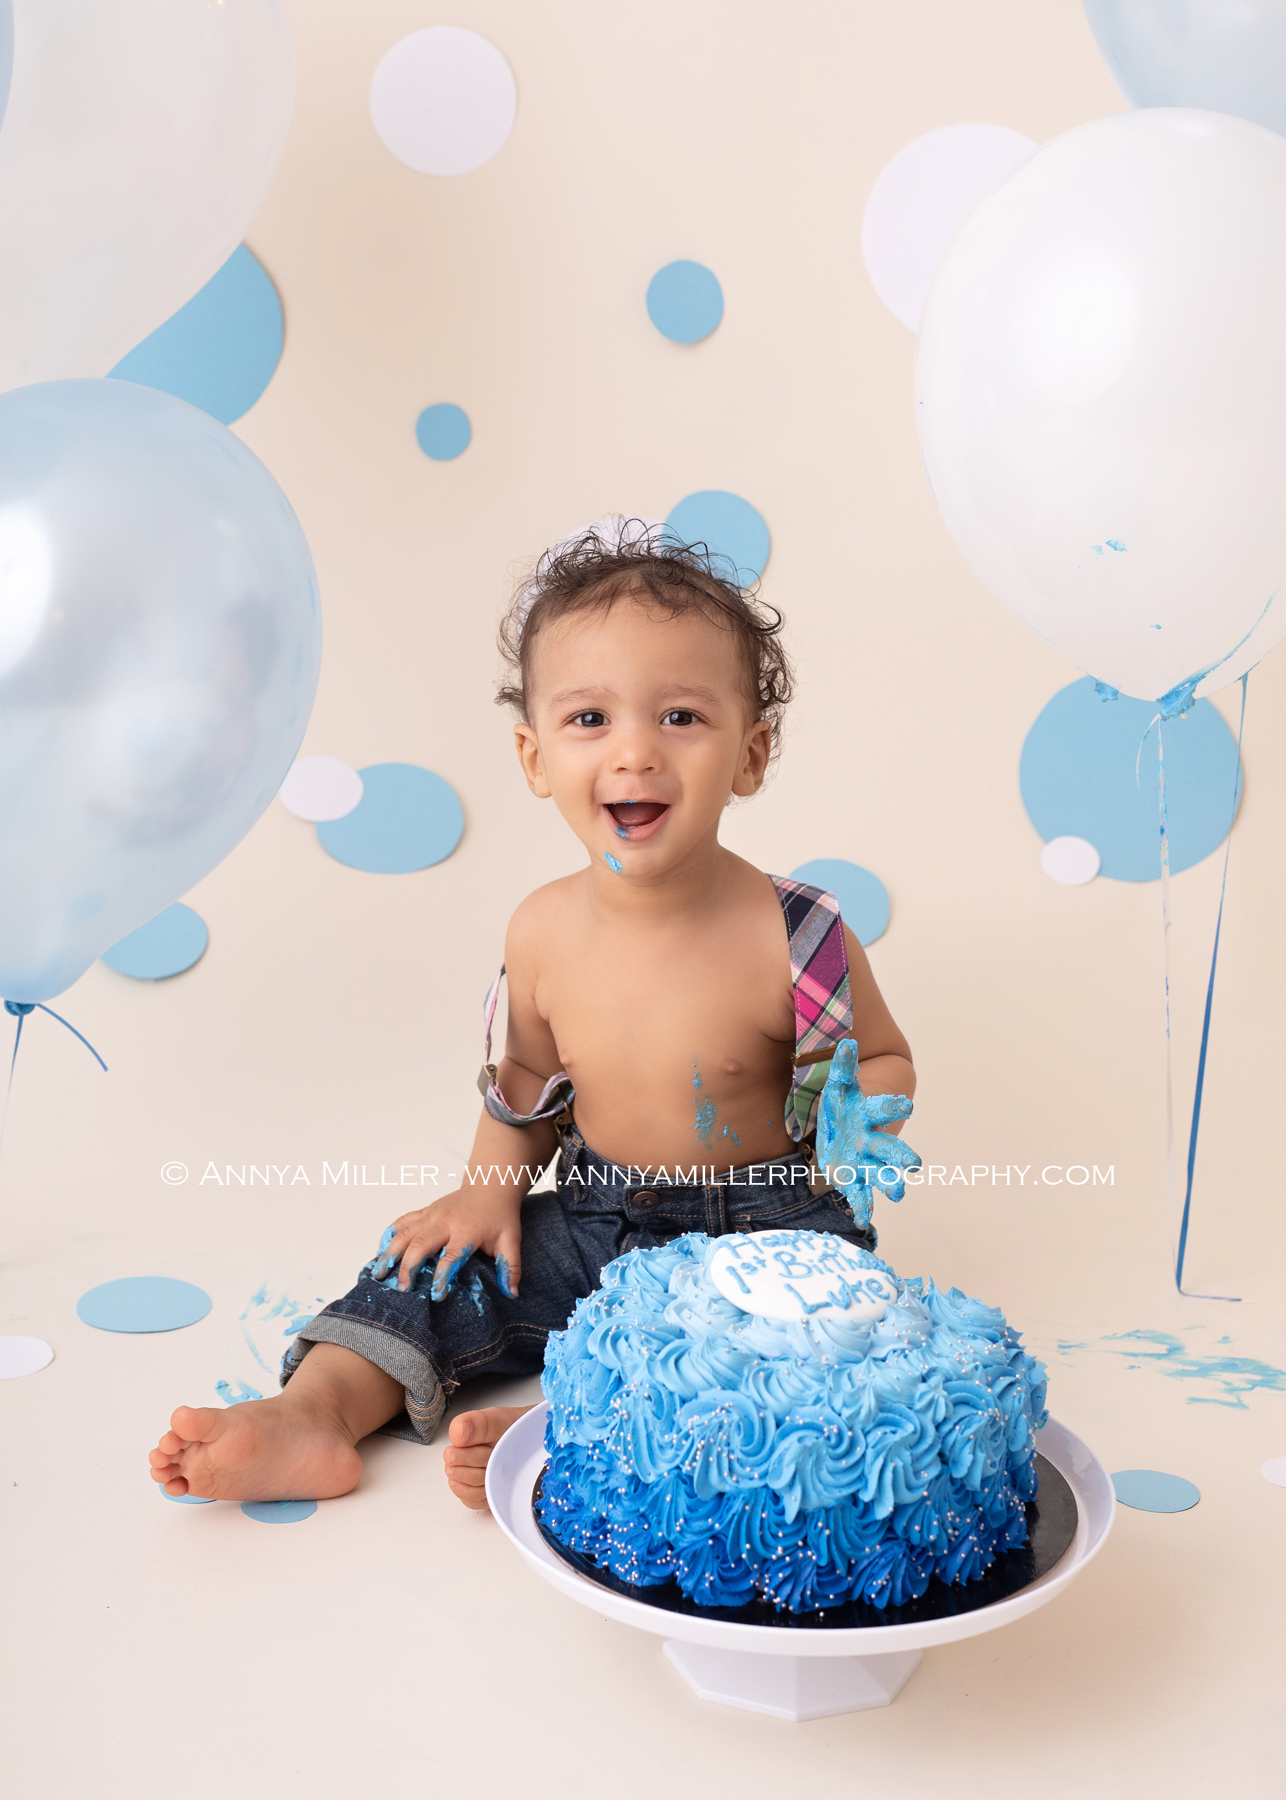 durham cake smash session of little boy eating birthday cake and splashing in bubble bath by Pickering photographer Annya Miller 